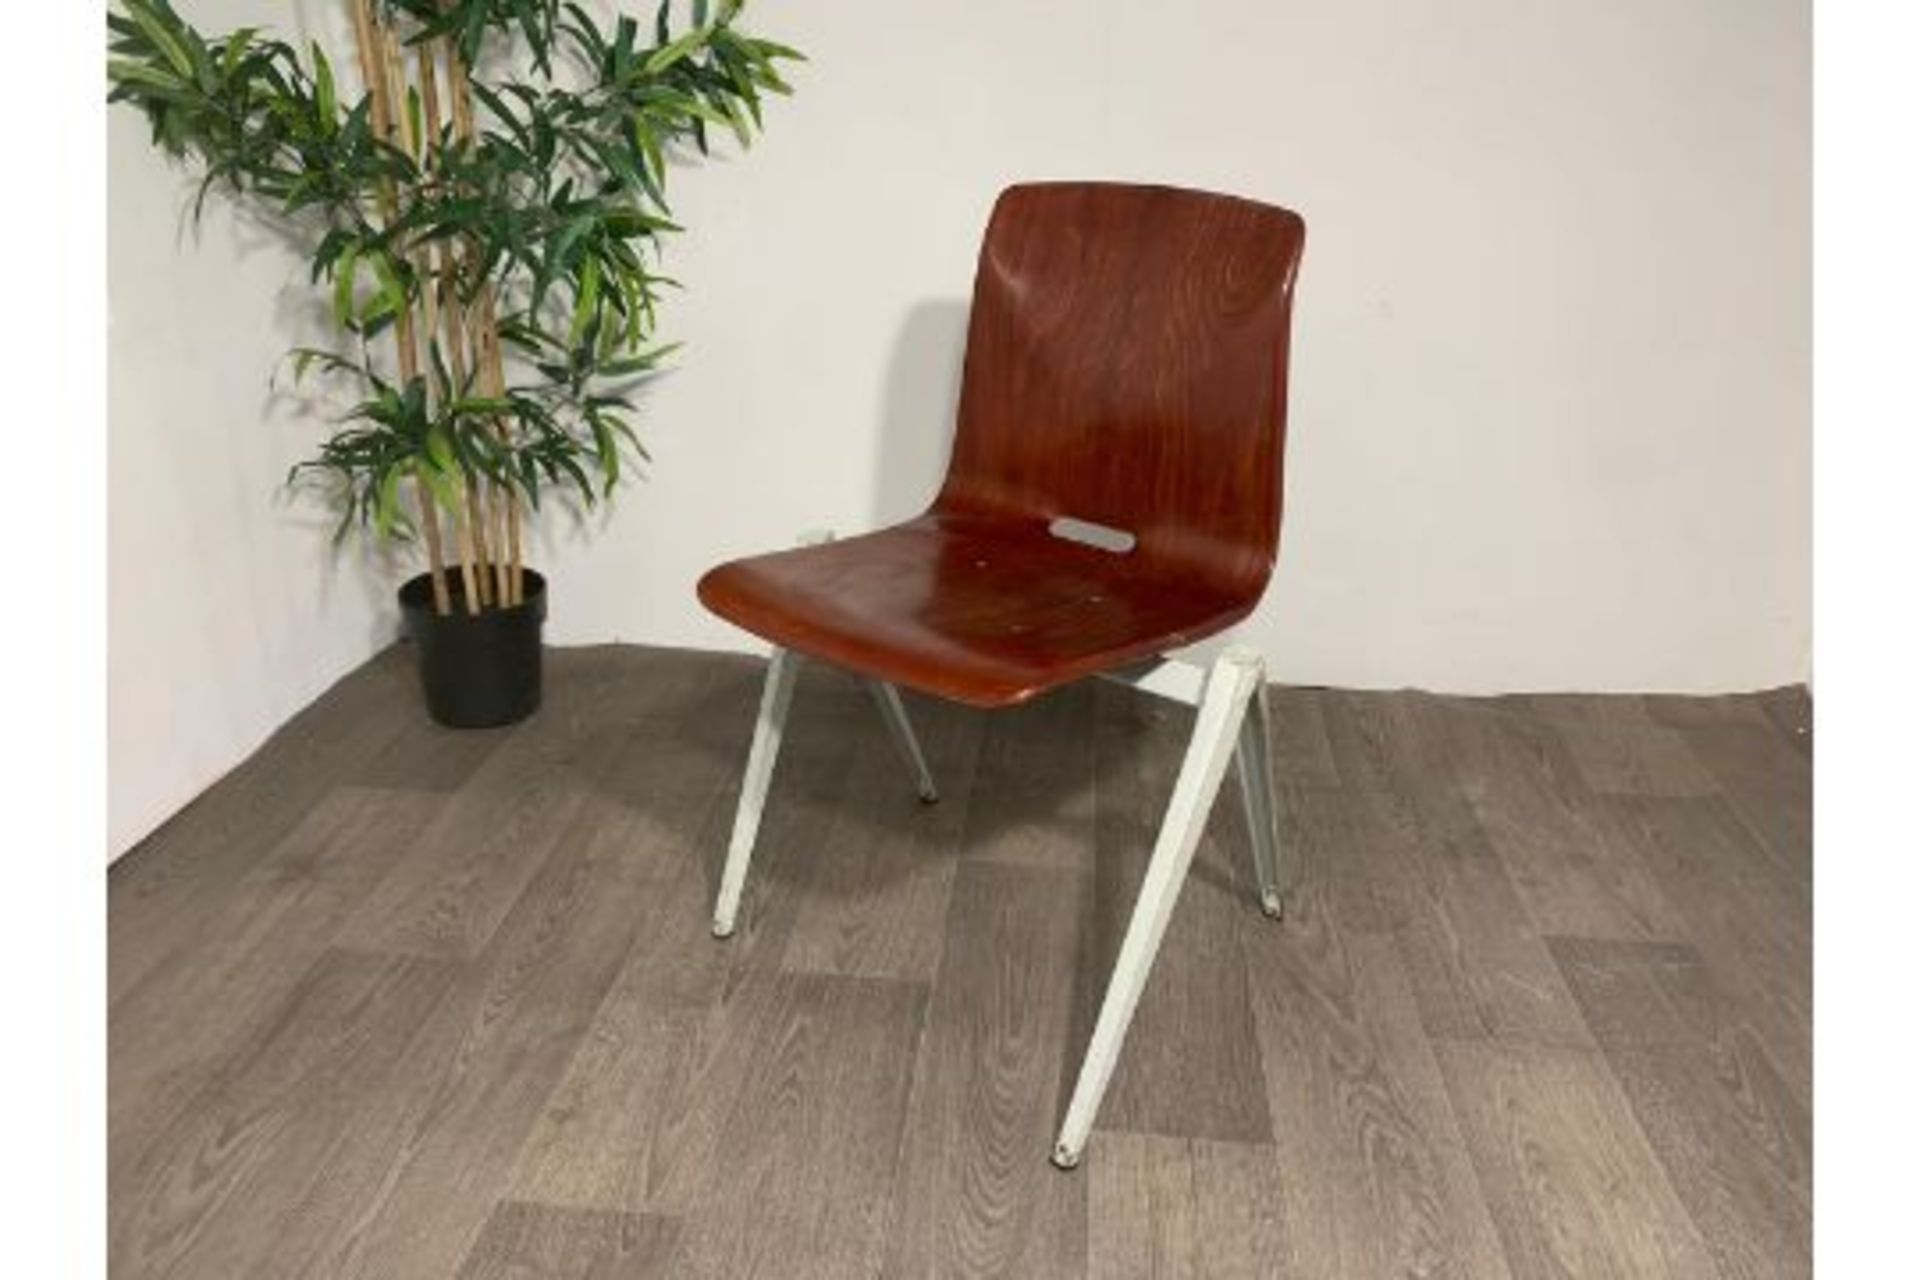 Thur Op Seat Stackable Chair in mahogany resin x2 - Image 4 of 6